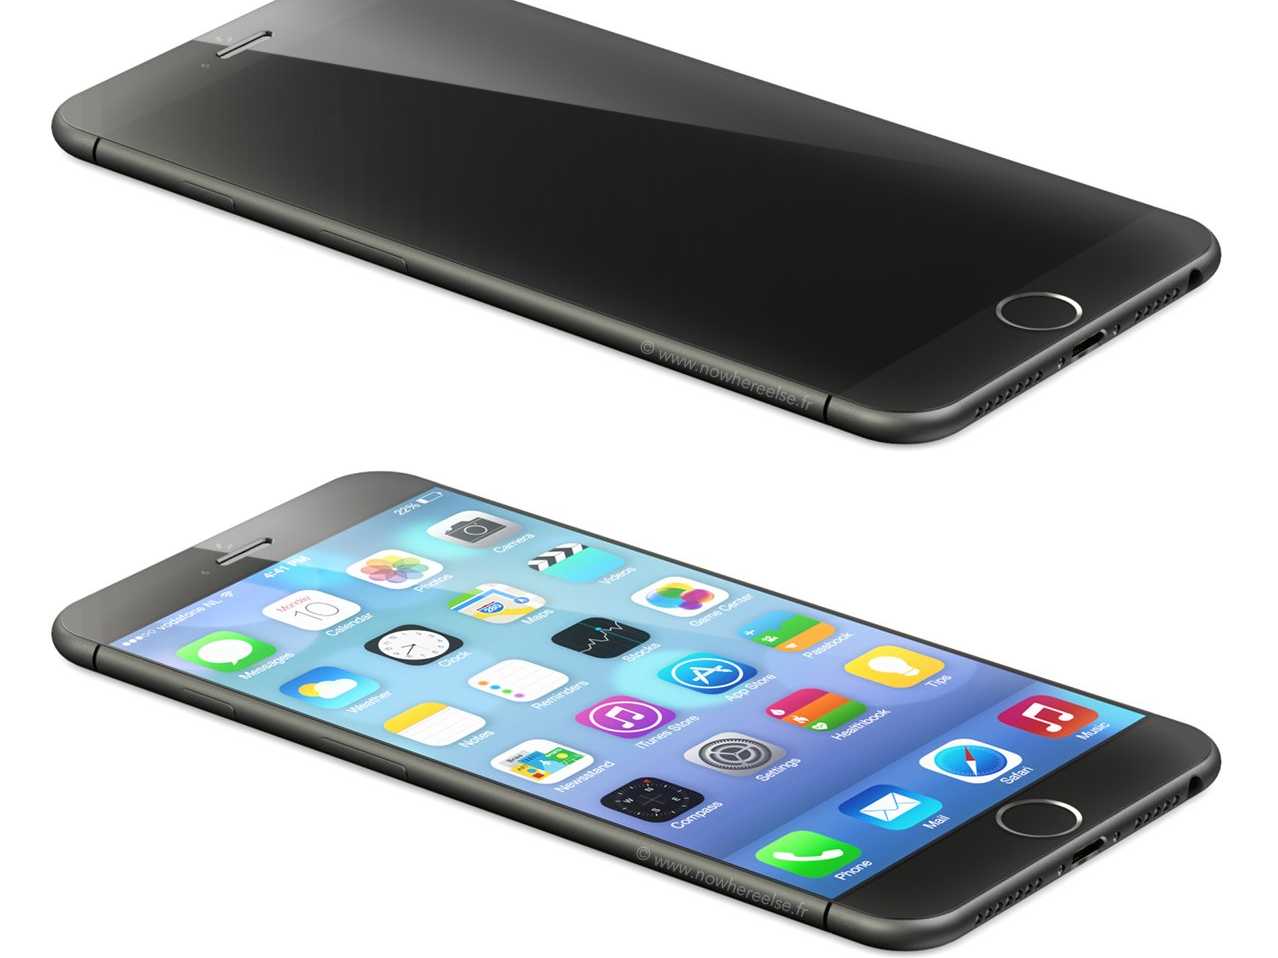 new-details-on-the-iphone-6-it-will-be-super-slim-high-res-come-in-two-sizes-and-the-power-button-is-moving